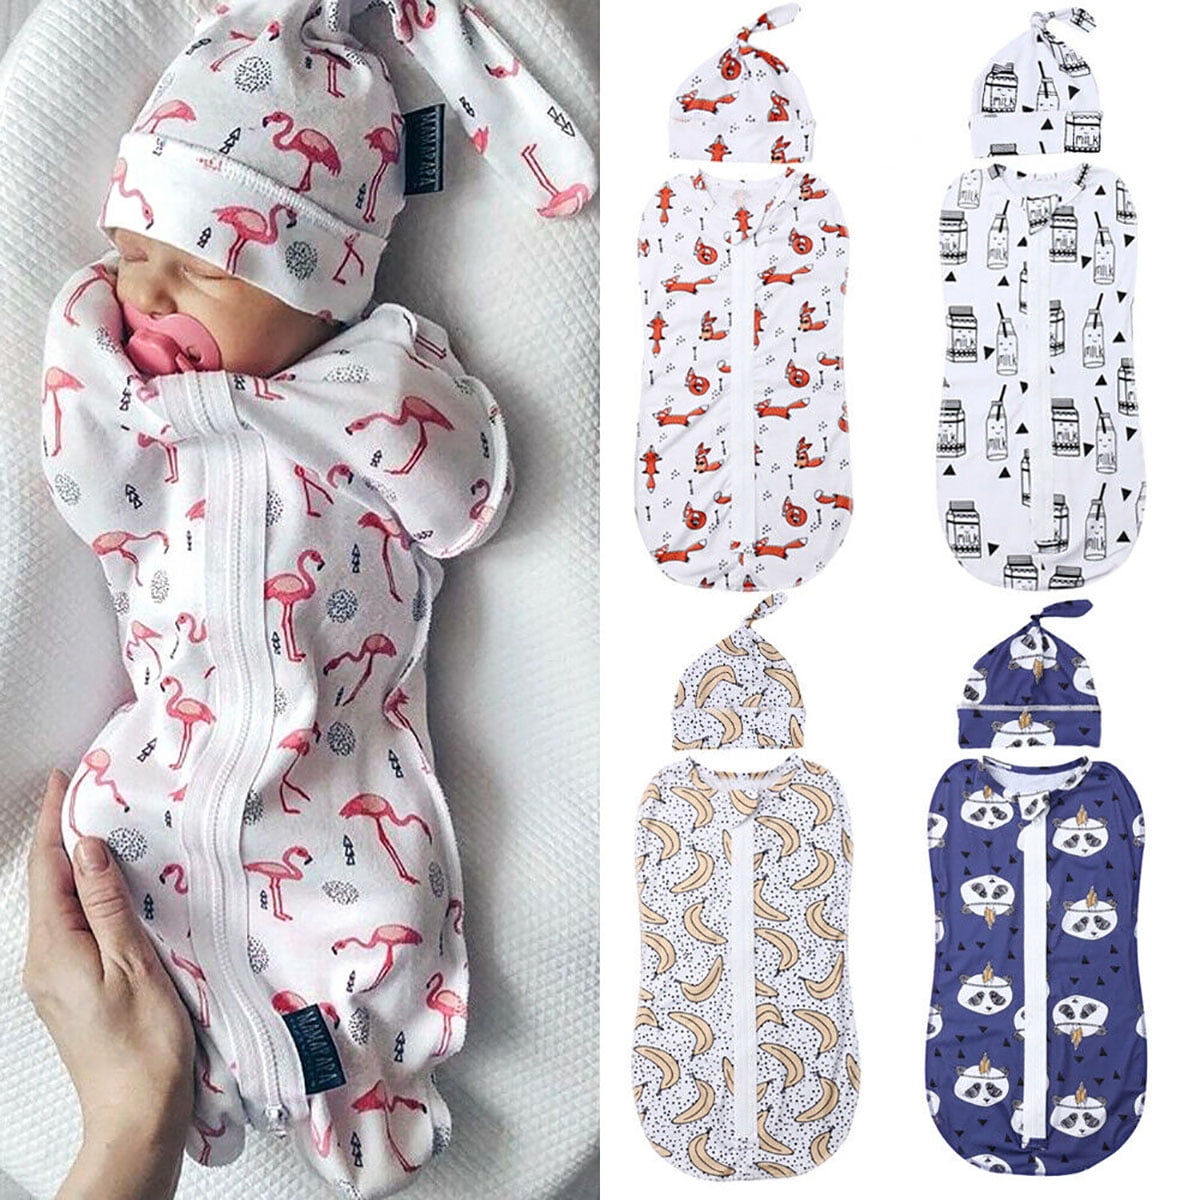 35 Baby Swaddle Wrap Blanket/Newborn Cotton Swaddling Sleeping Bag 0 to 3 Months